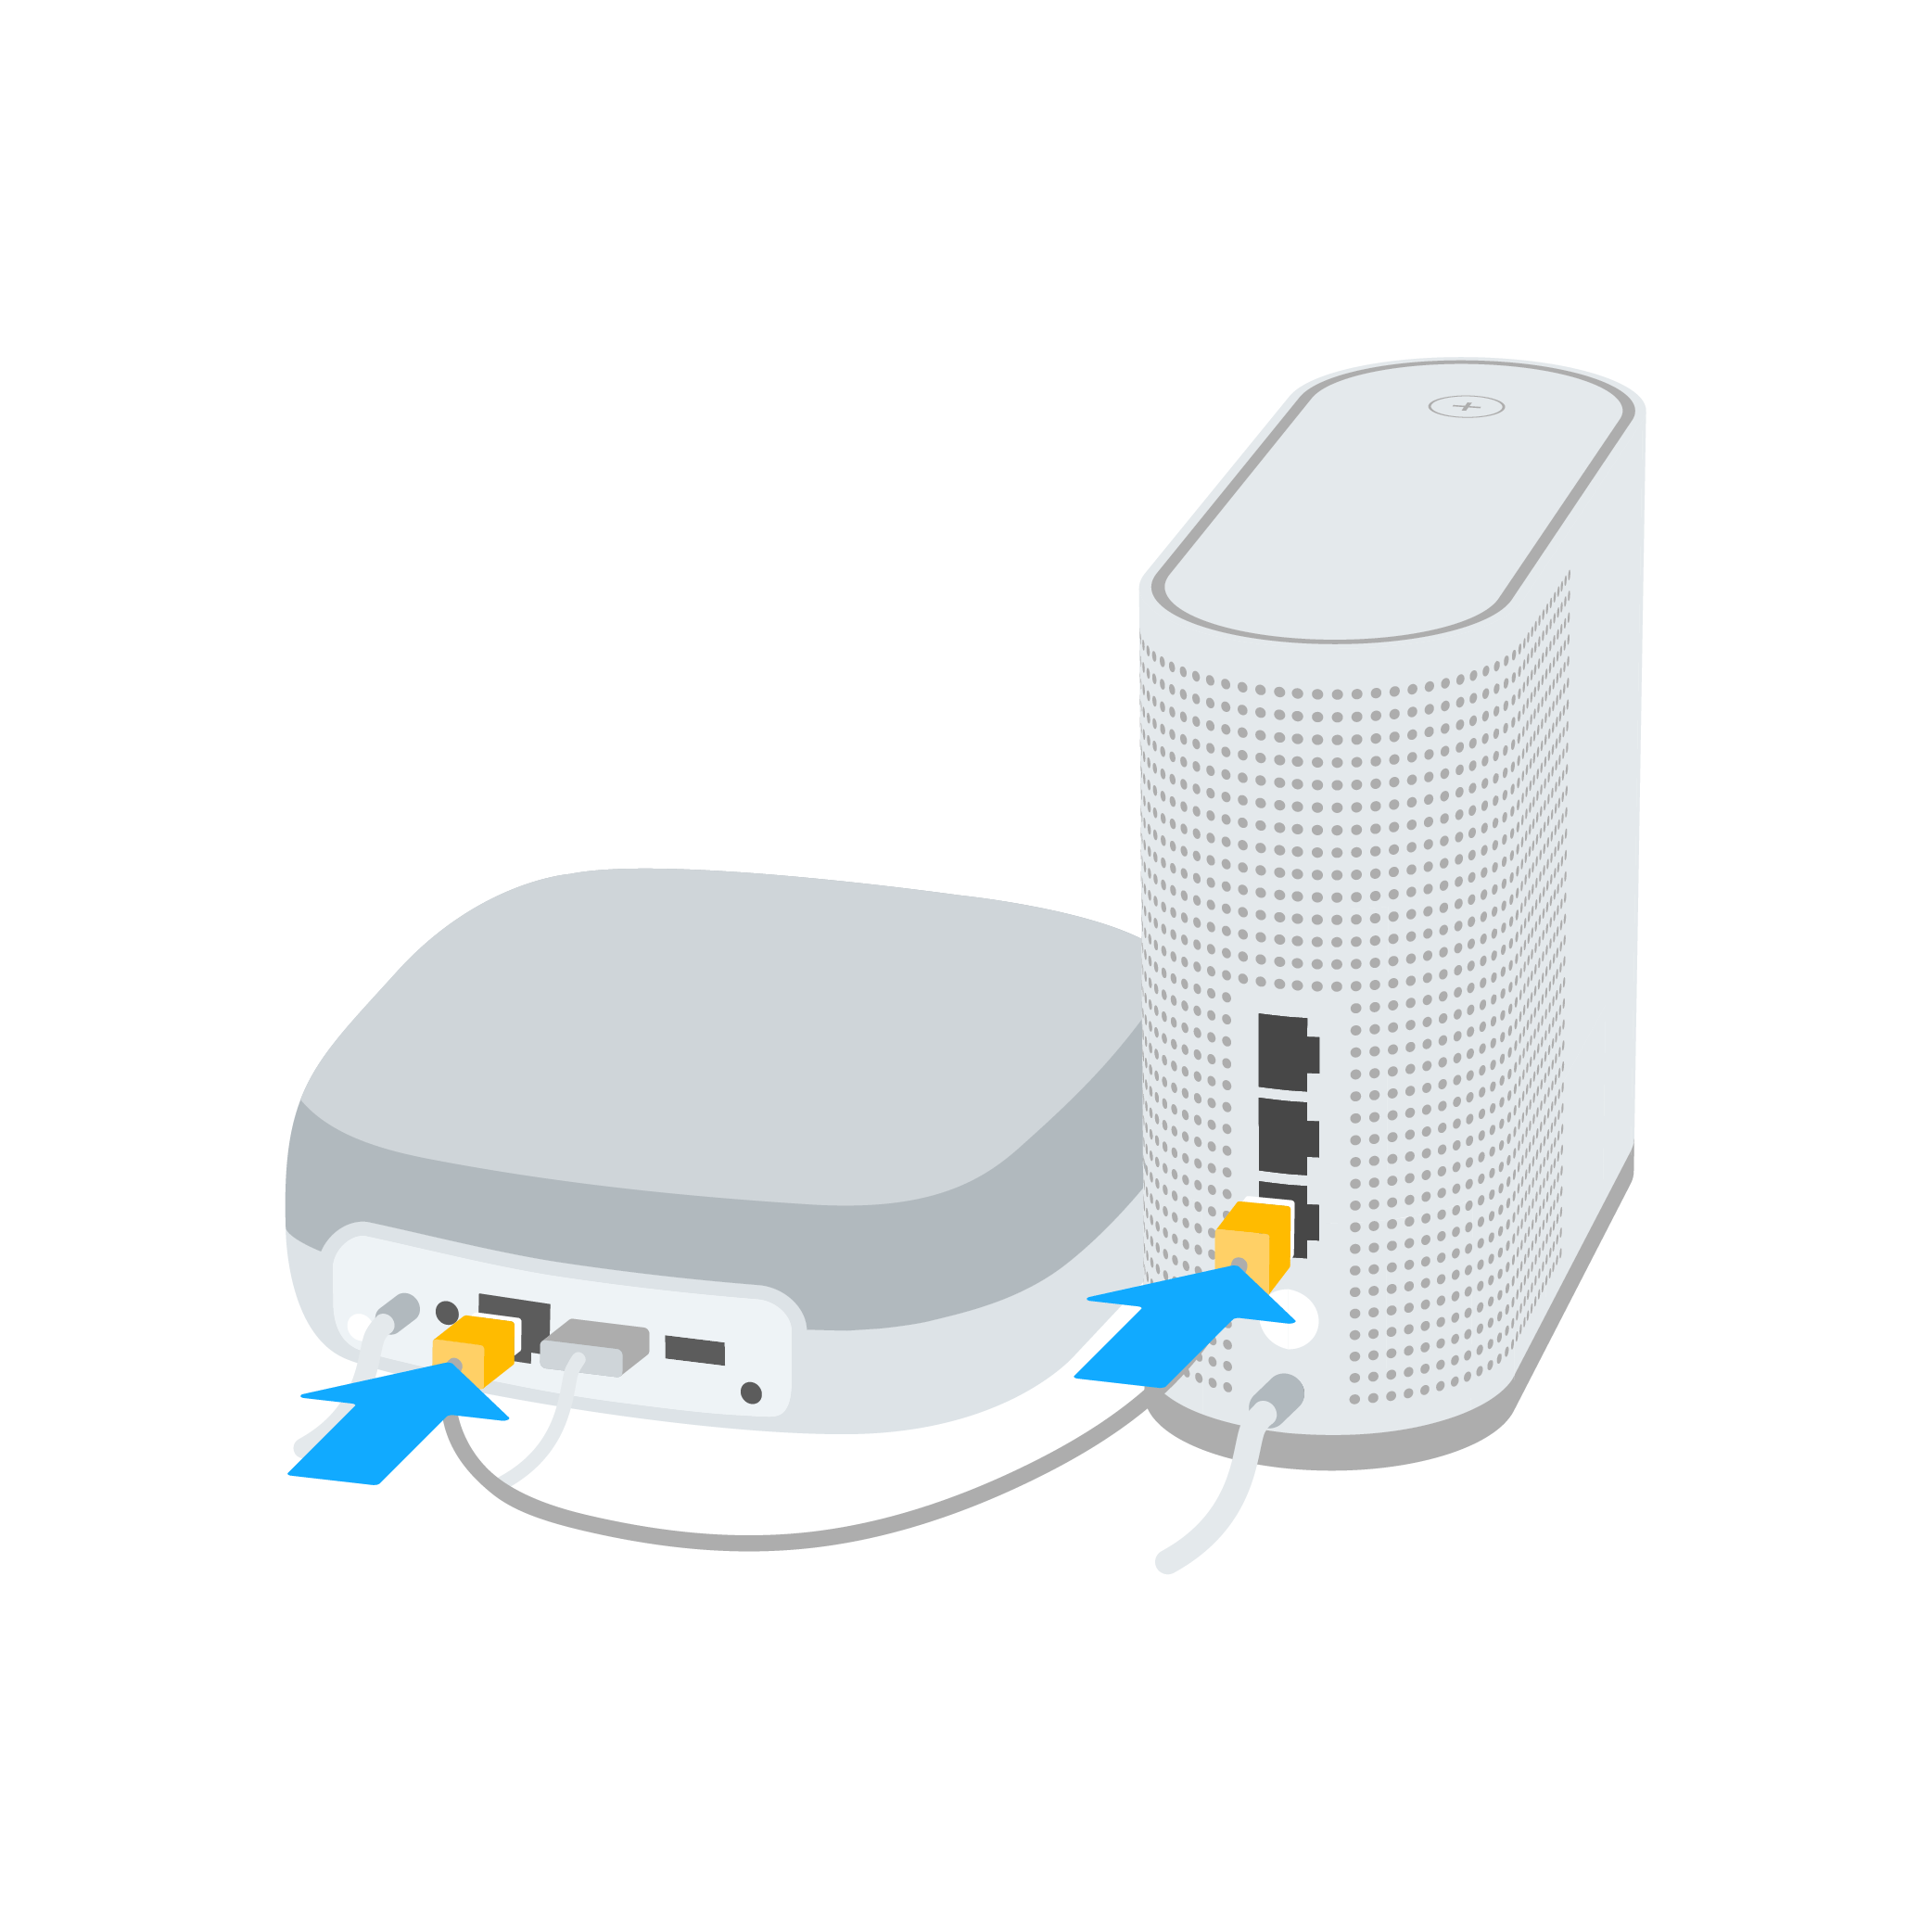 Connecting to the Swisscom TV-Box